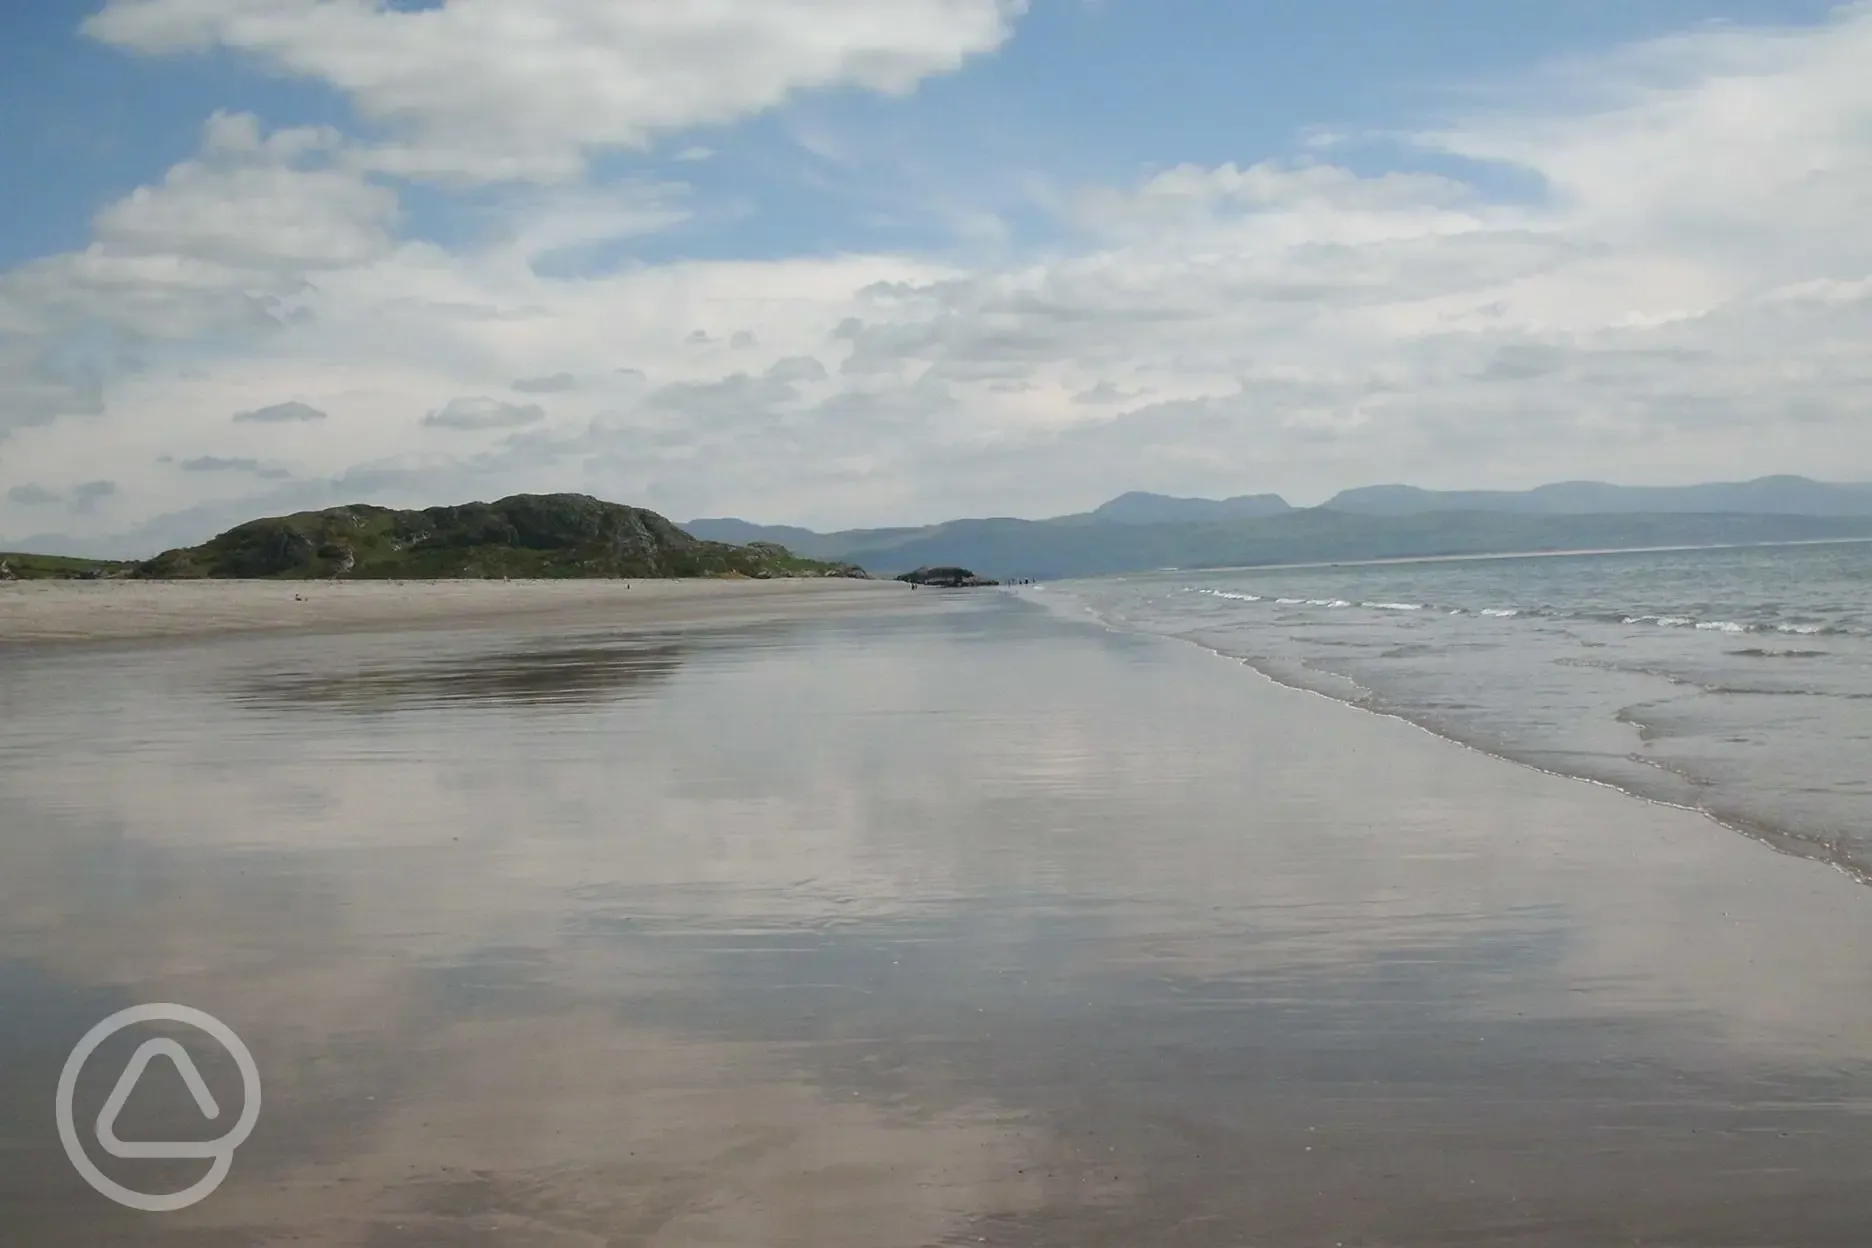 The bay and Black Rock Sands